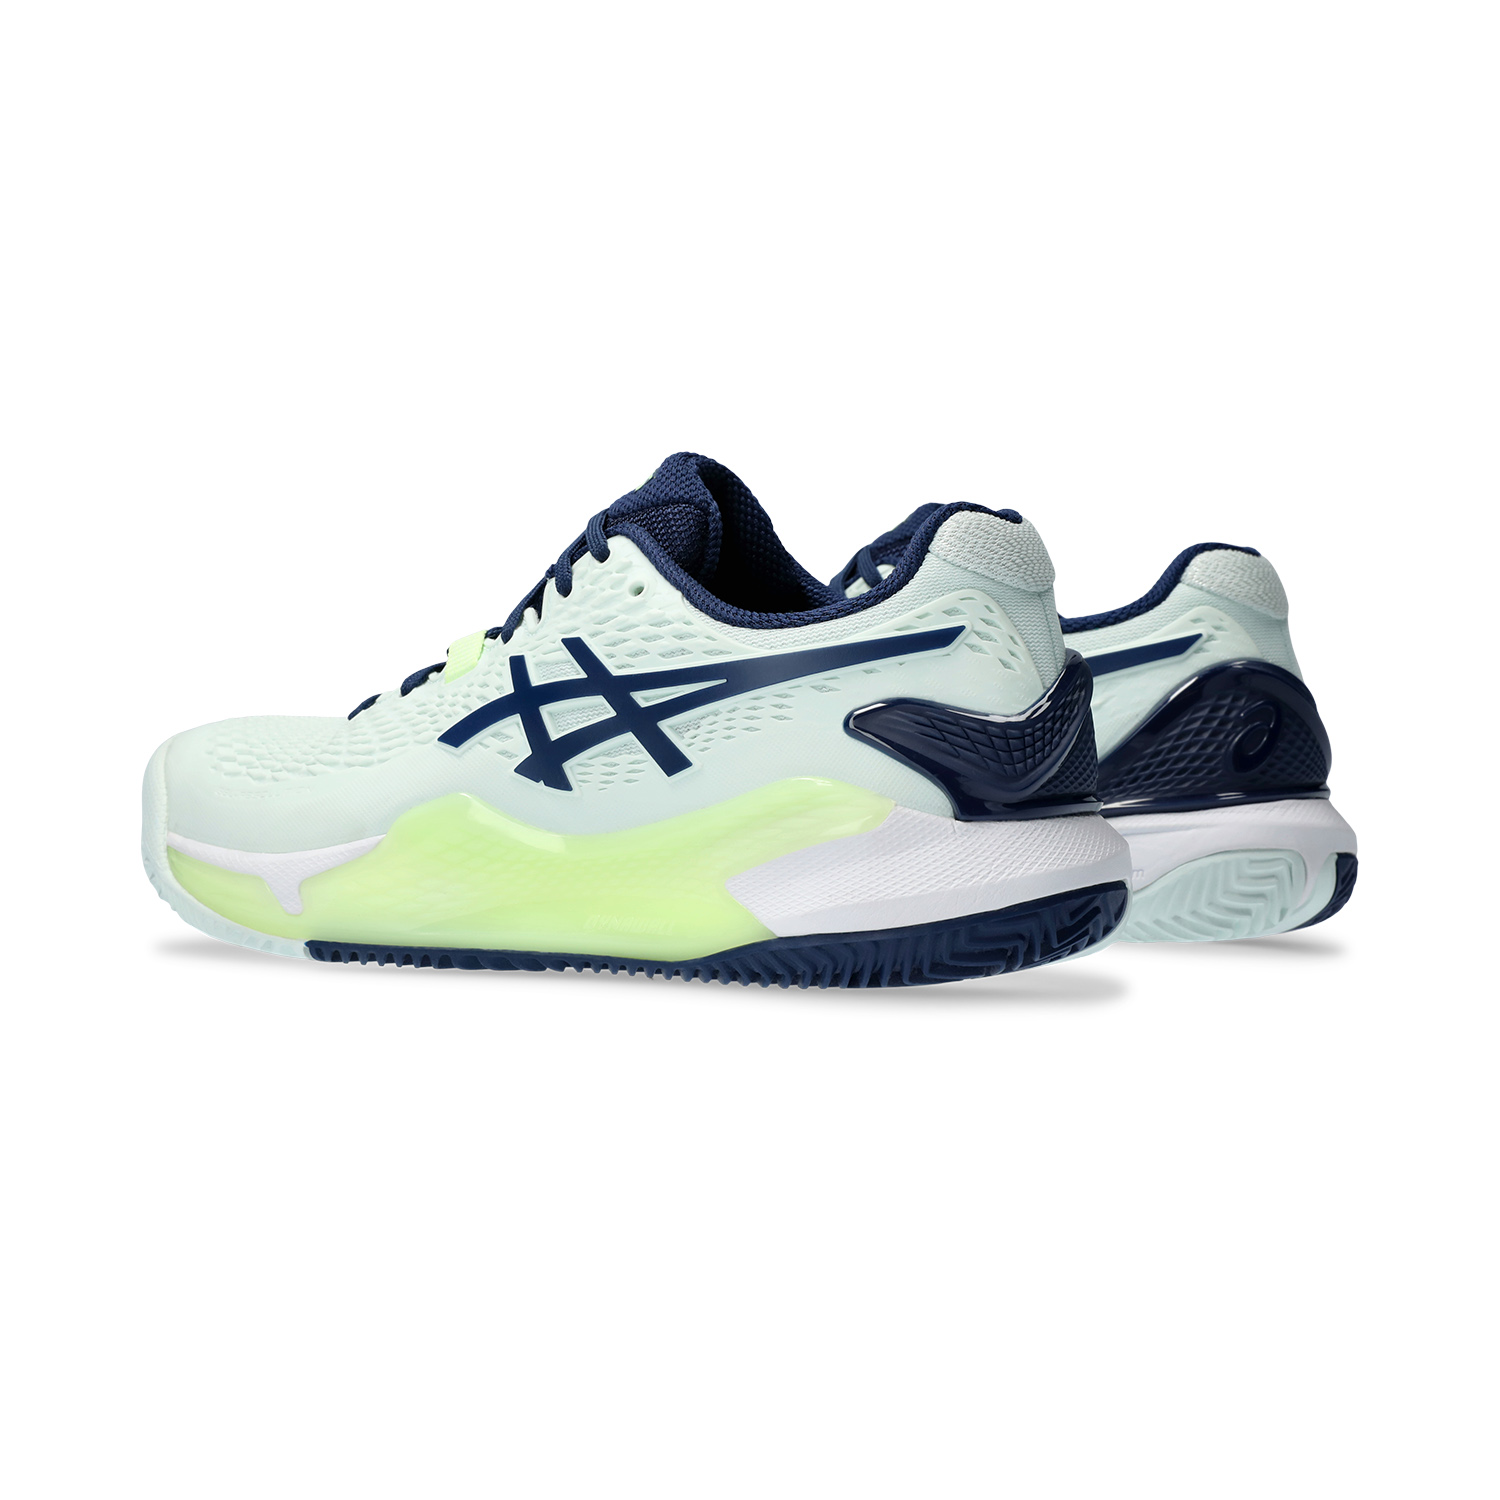 Asics Gel Resolution 9 Clay - Pale Mint/Blue Expanse